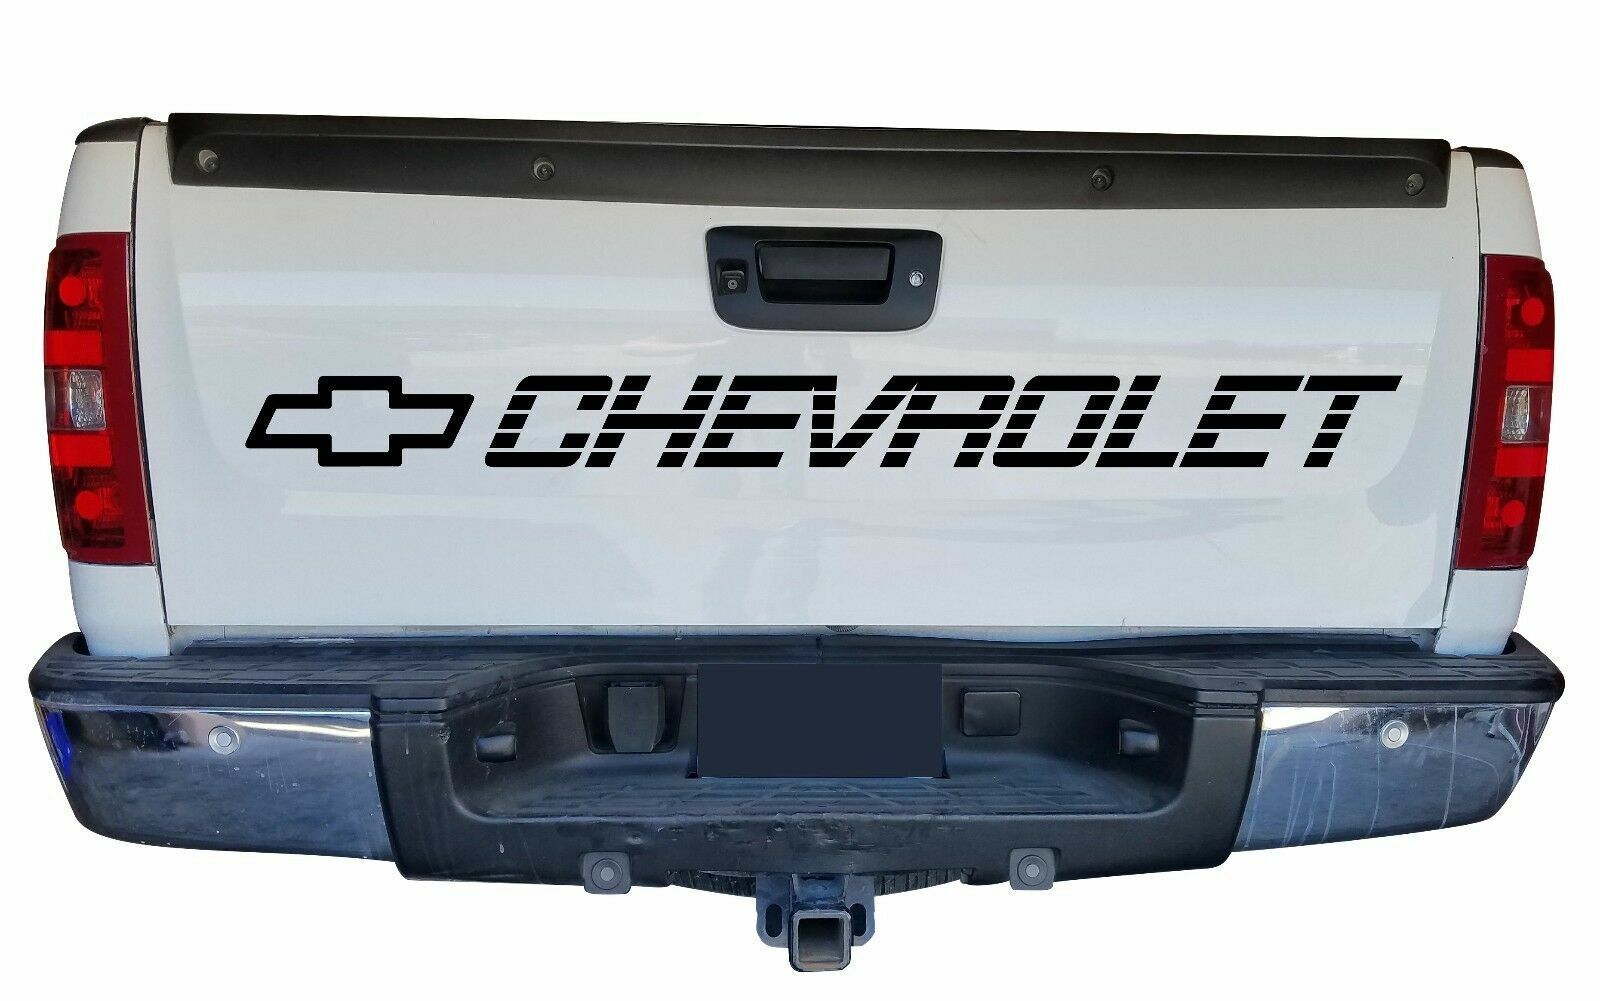 CHEVY Decals CHEVROLET Vinyl Sticker Silverado 1500 Bed Tailgate Letters 454 SS